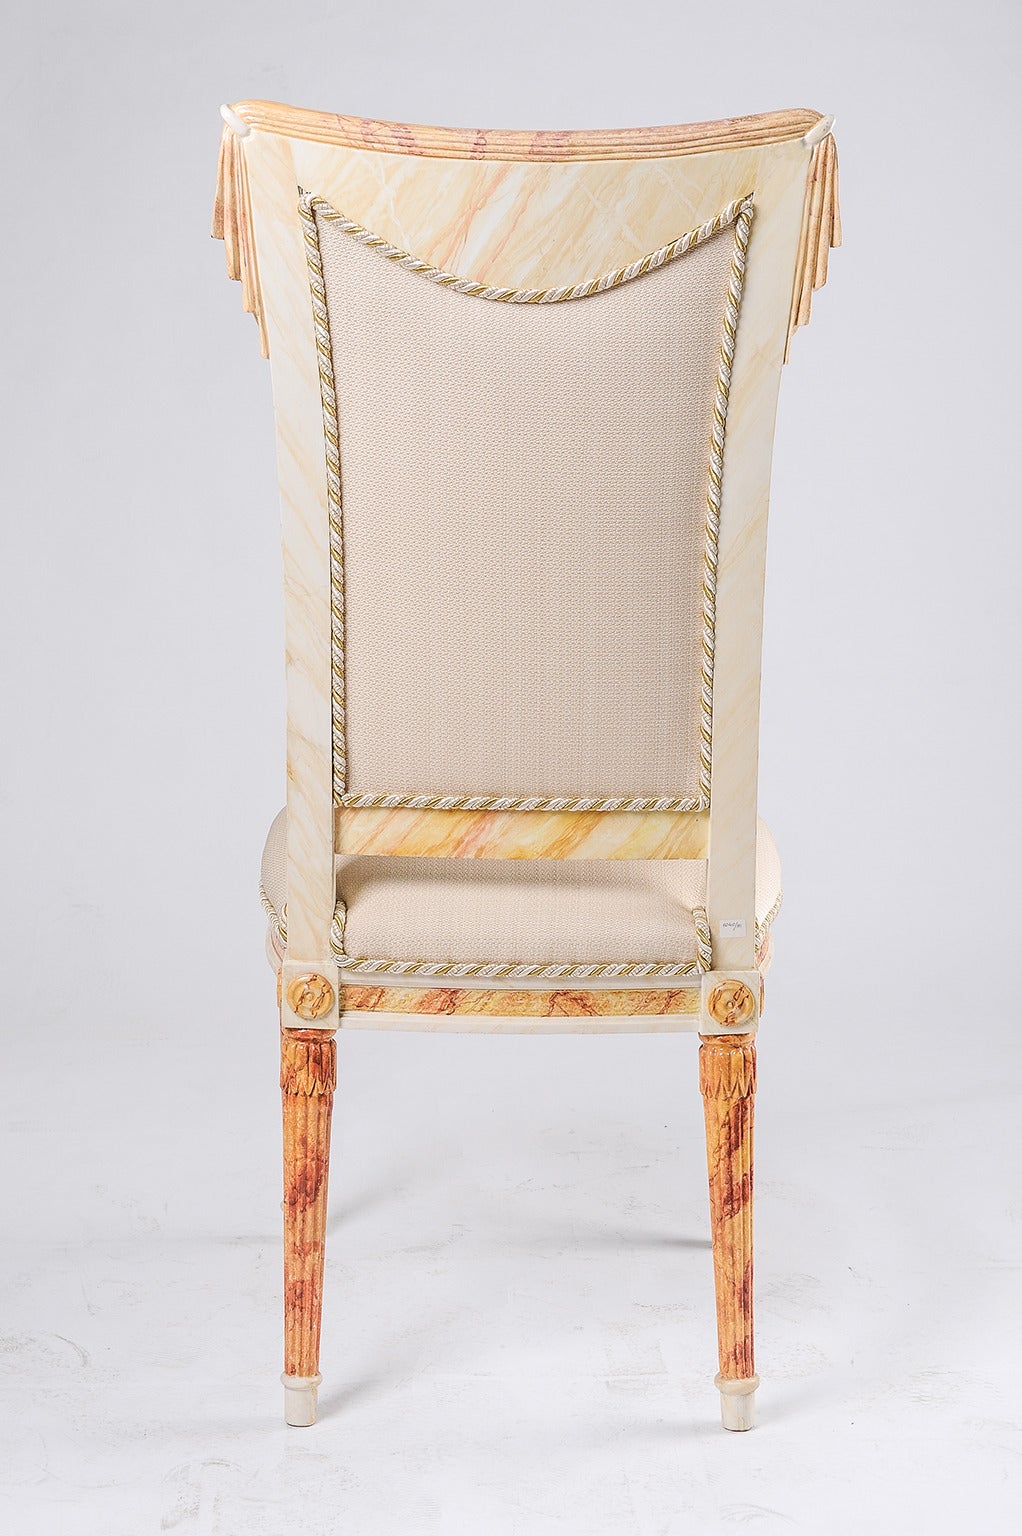 Hollywood Regency Draped Fanciful  Chair for a Young Girl or a Lady For Sale